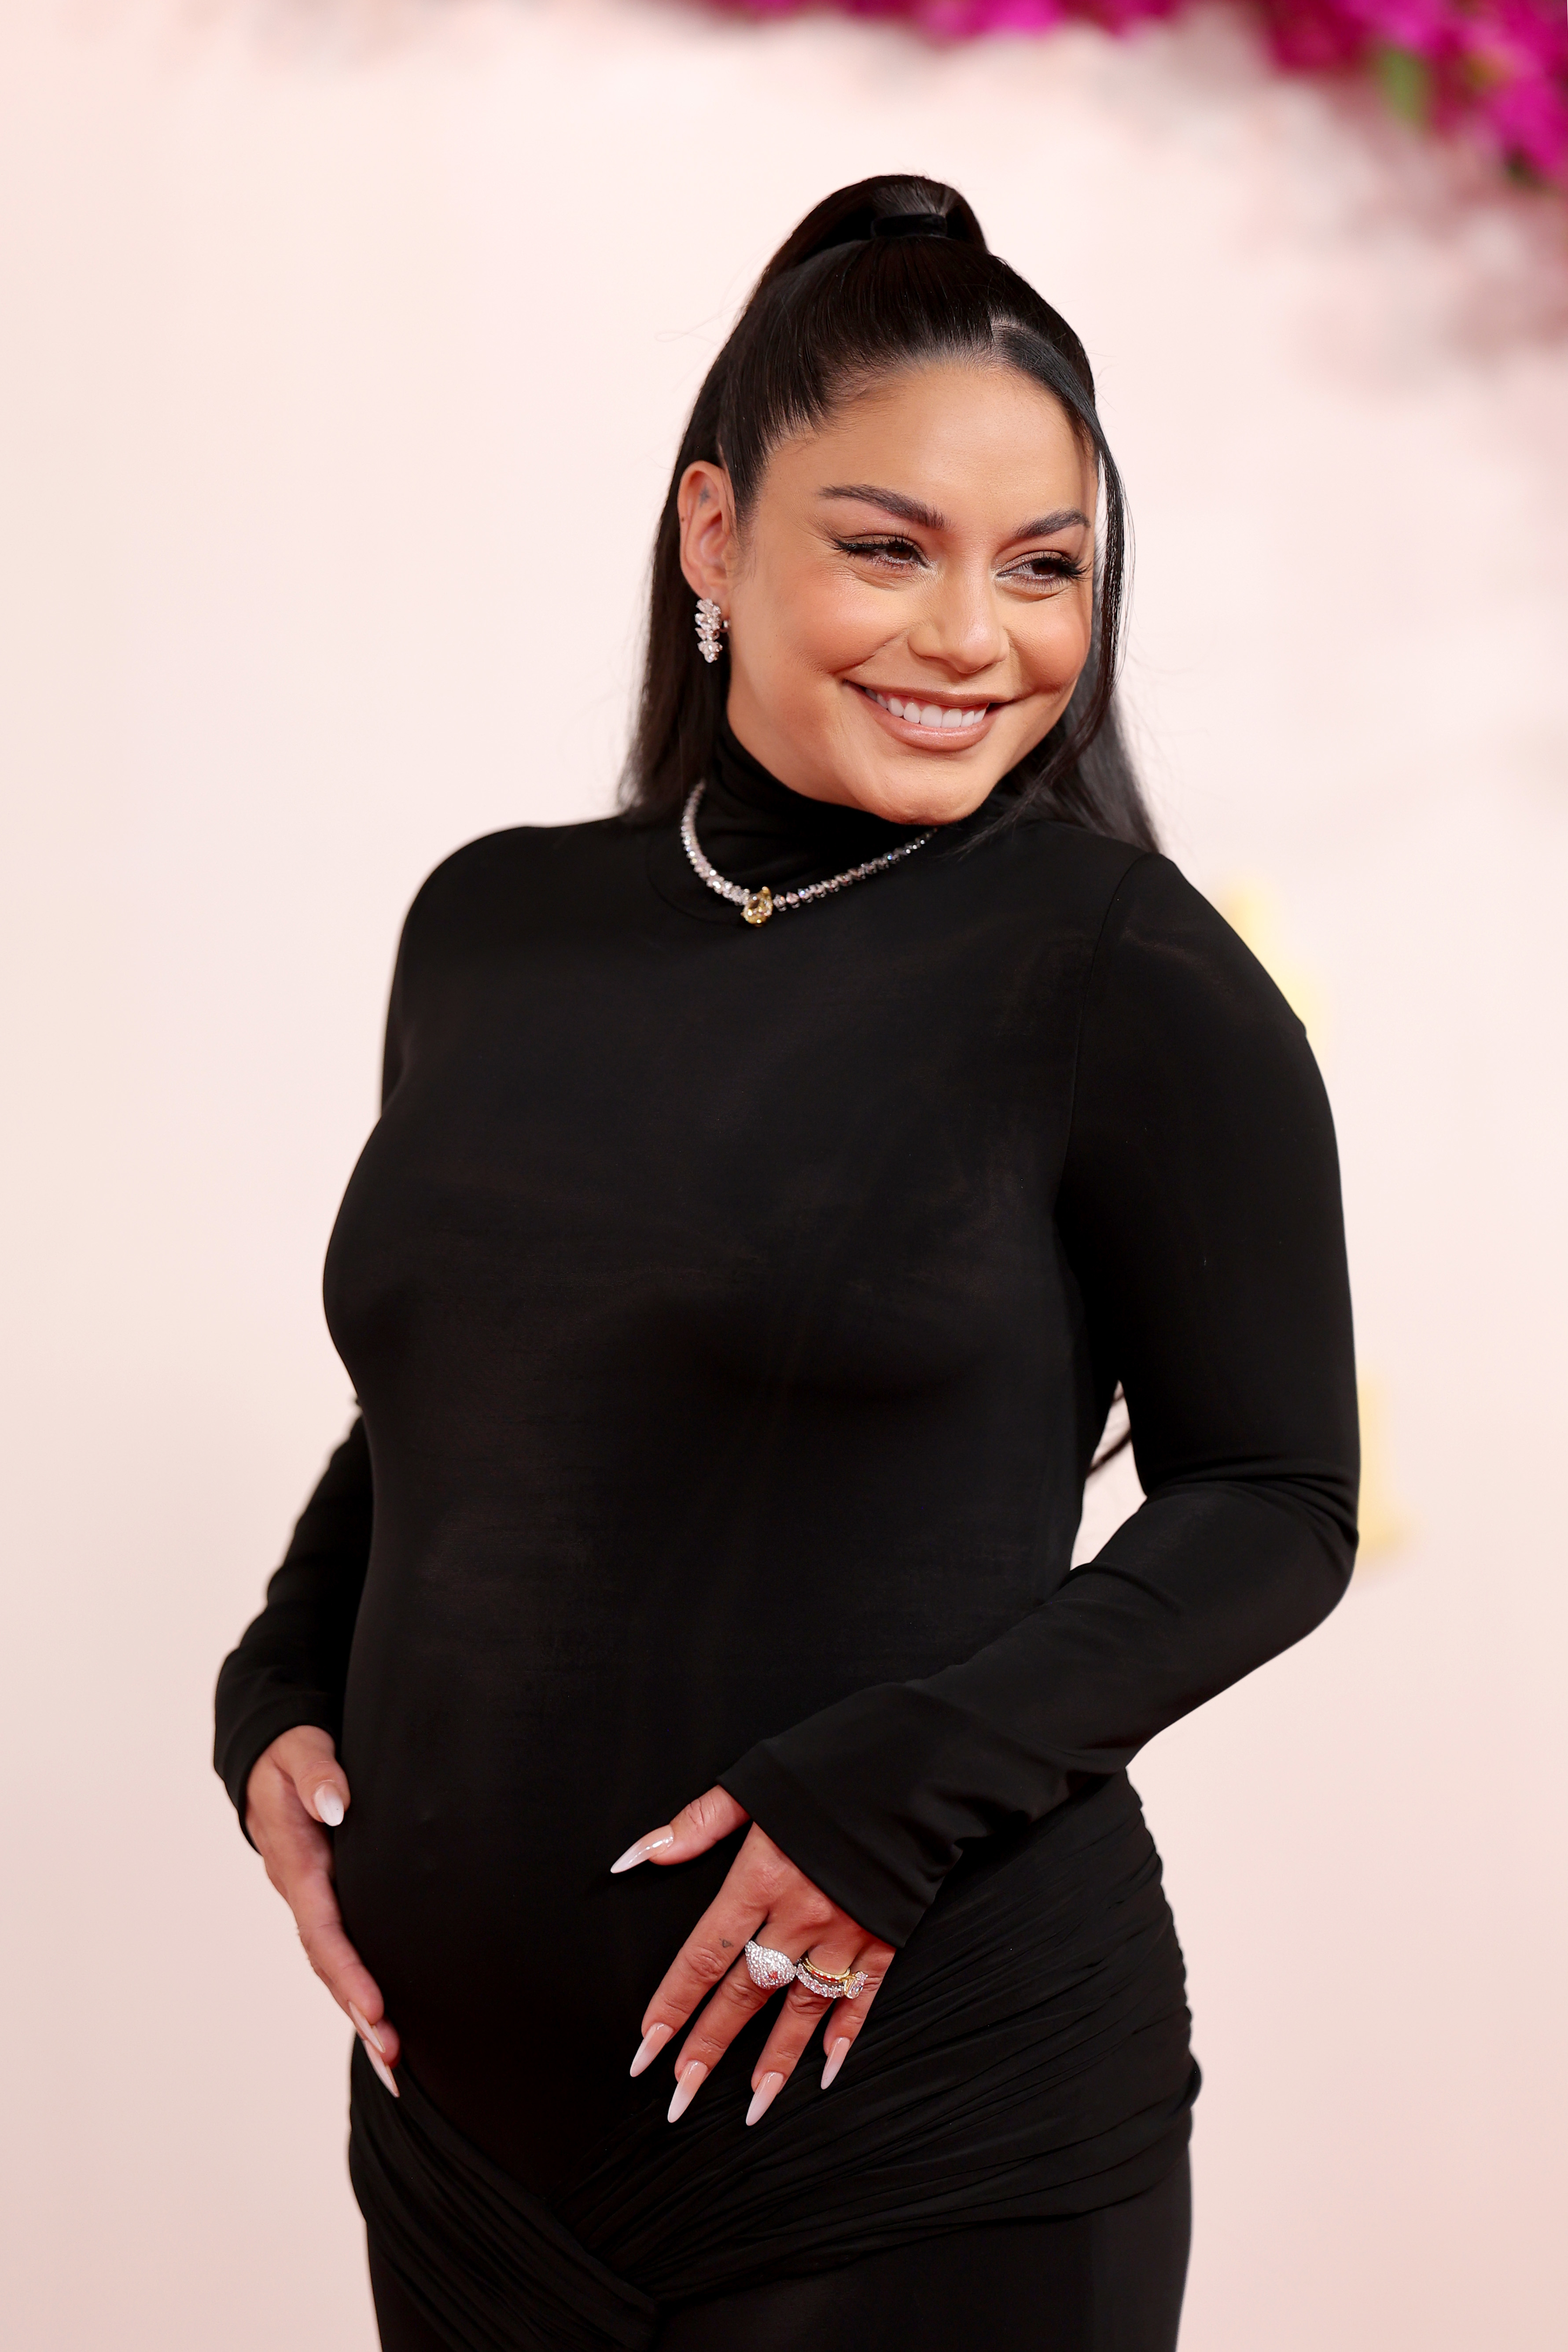 Vanessa Hudgens cradles her baby bump, smiling in a fitted black gown with long sleeves and a high neckline on the red carpet